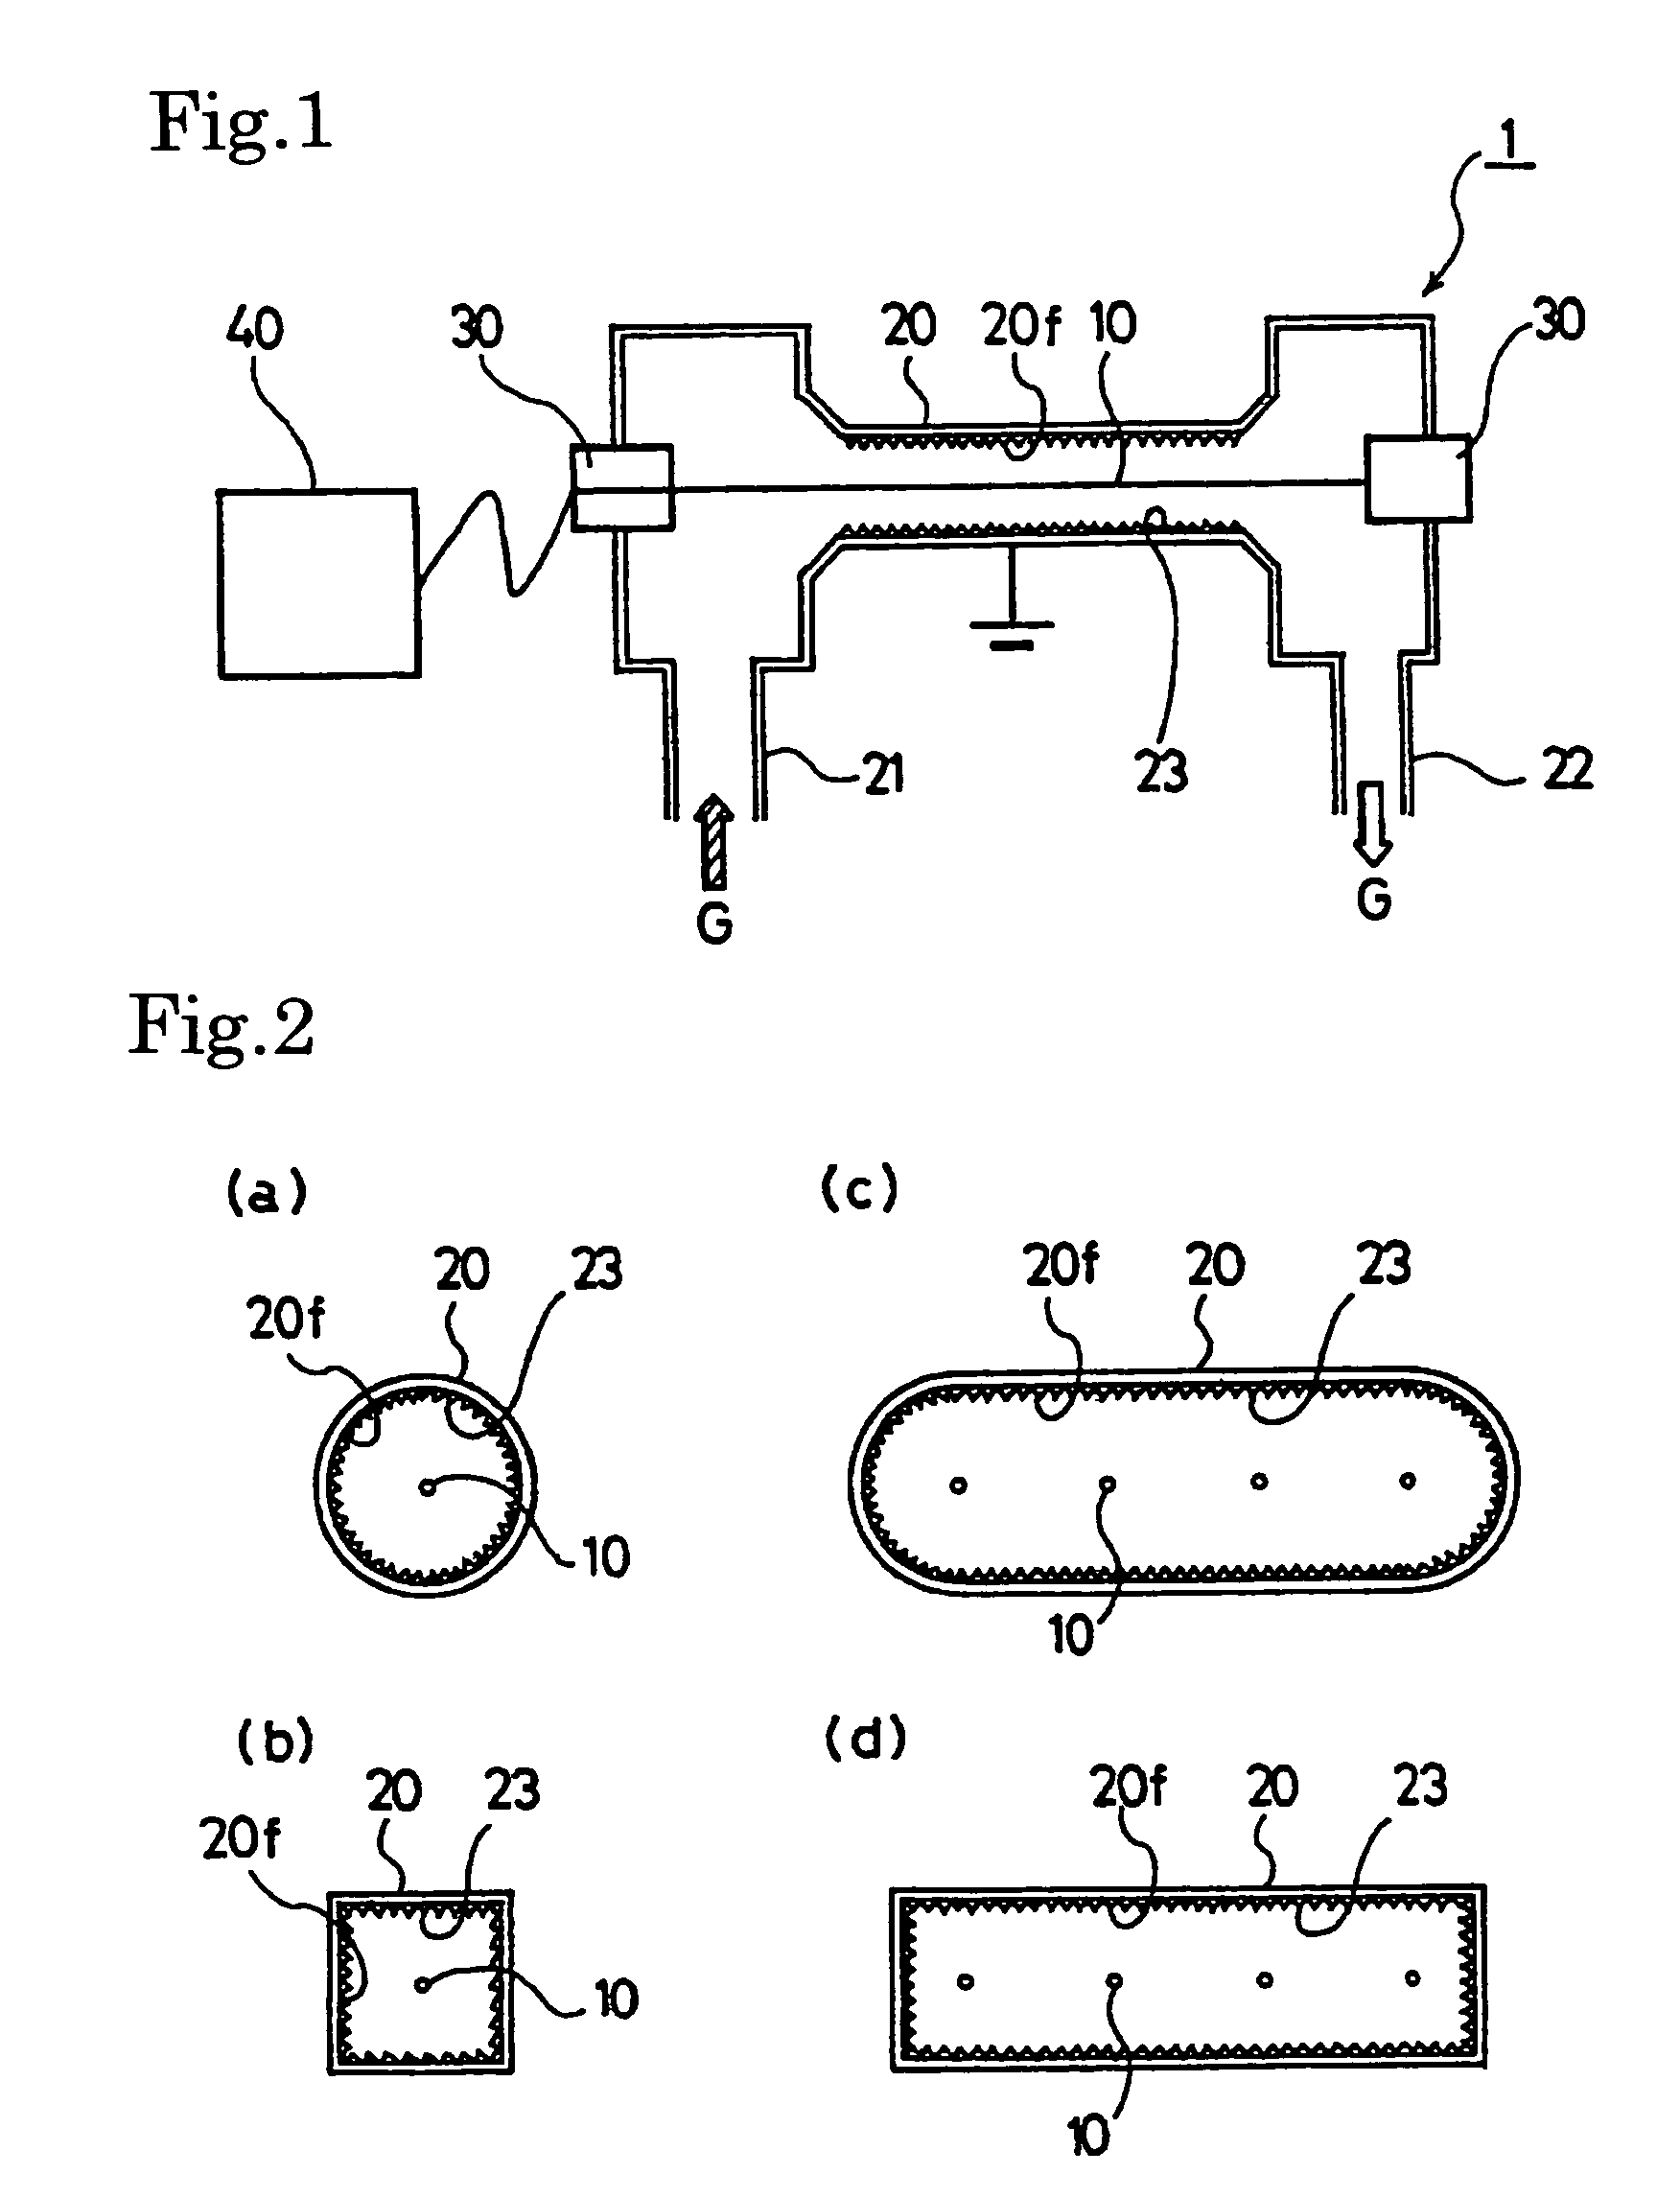 Gas treatment device